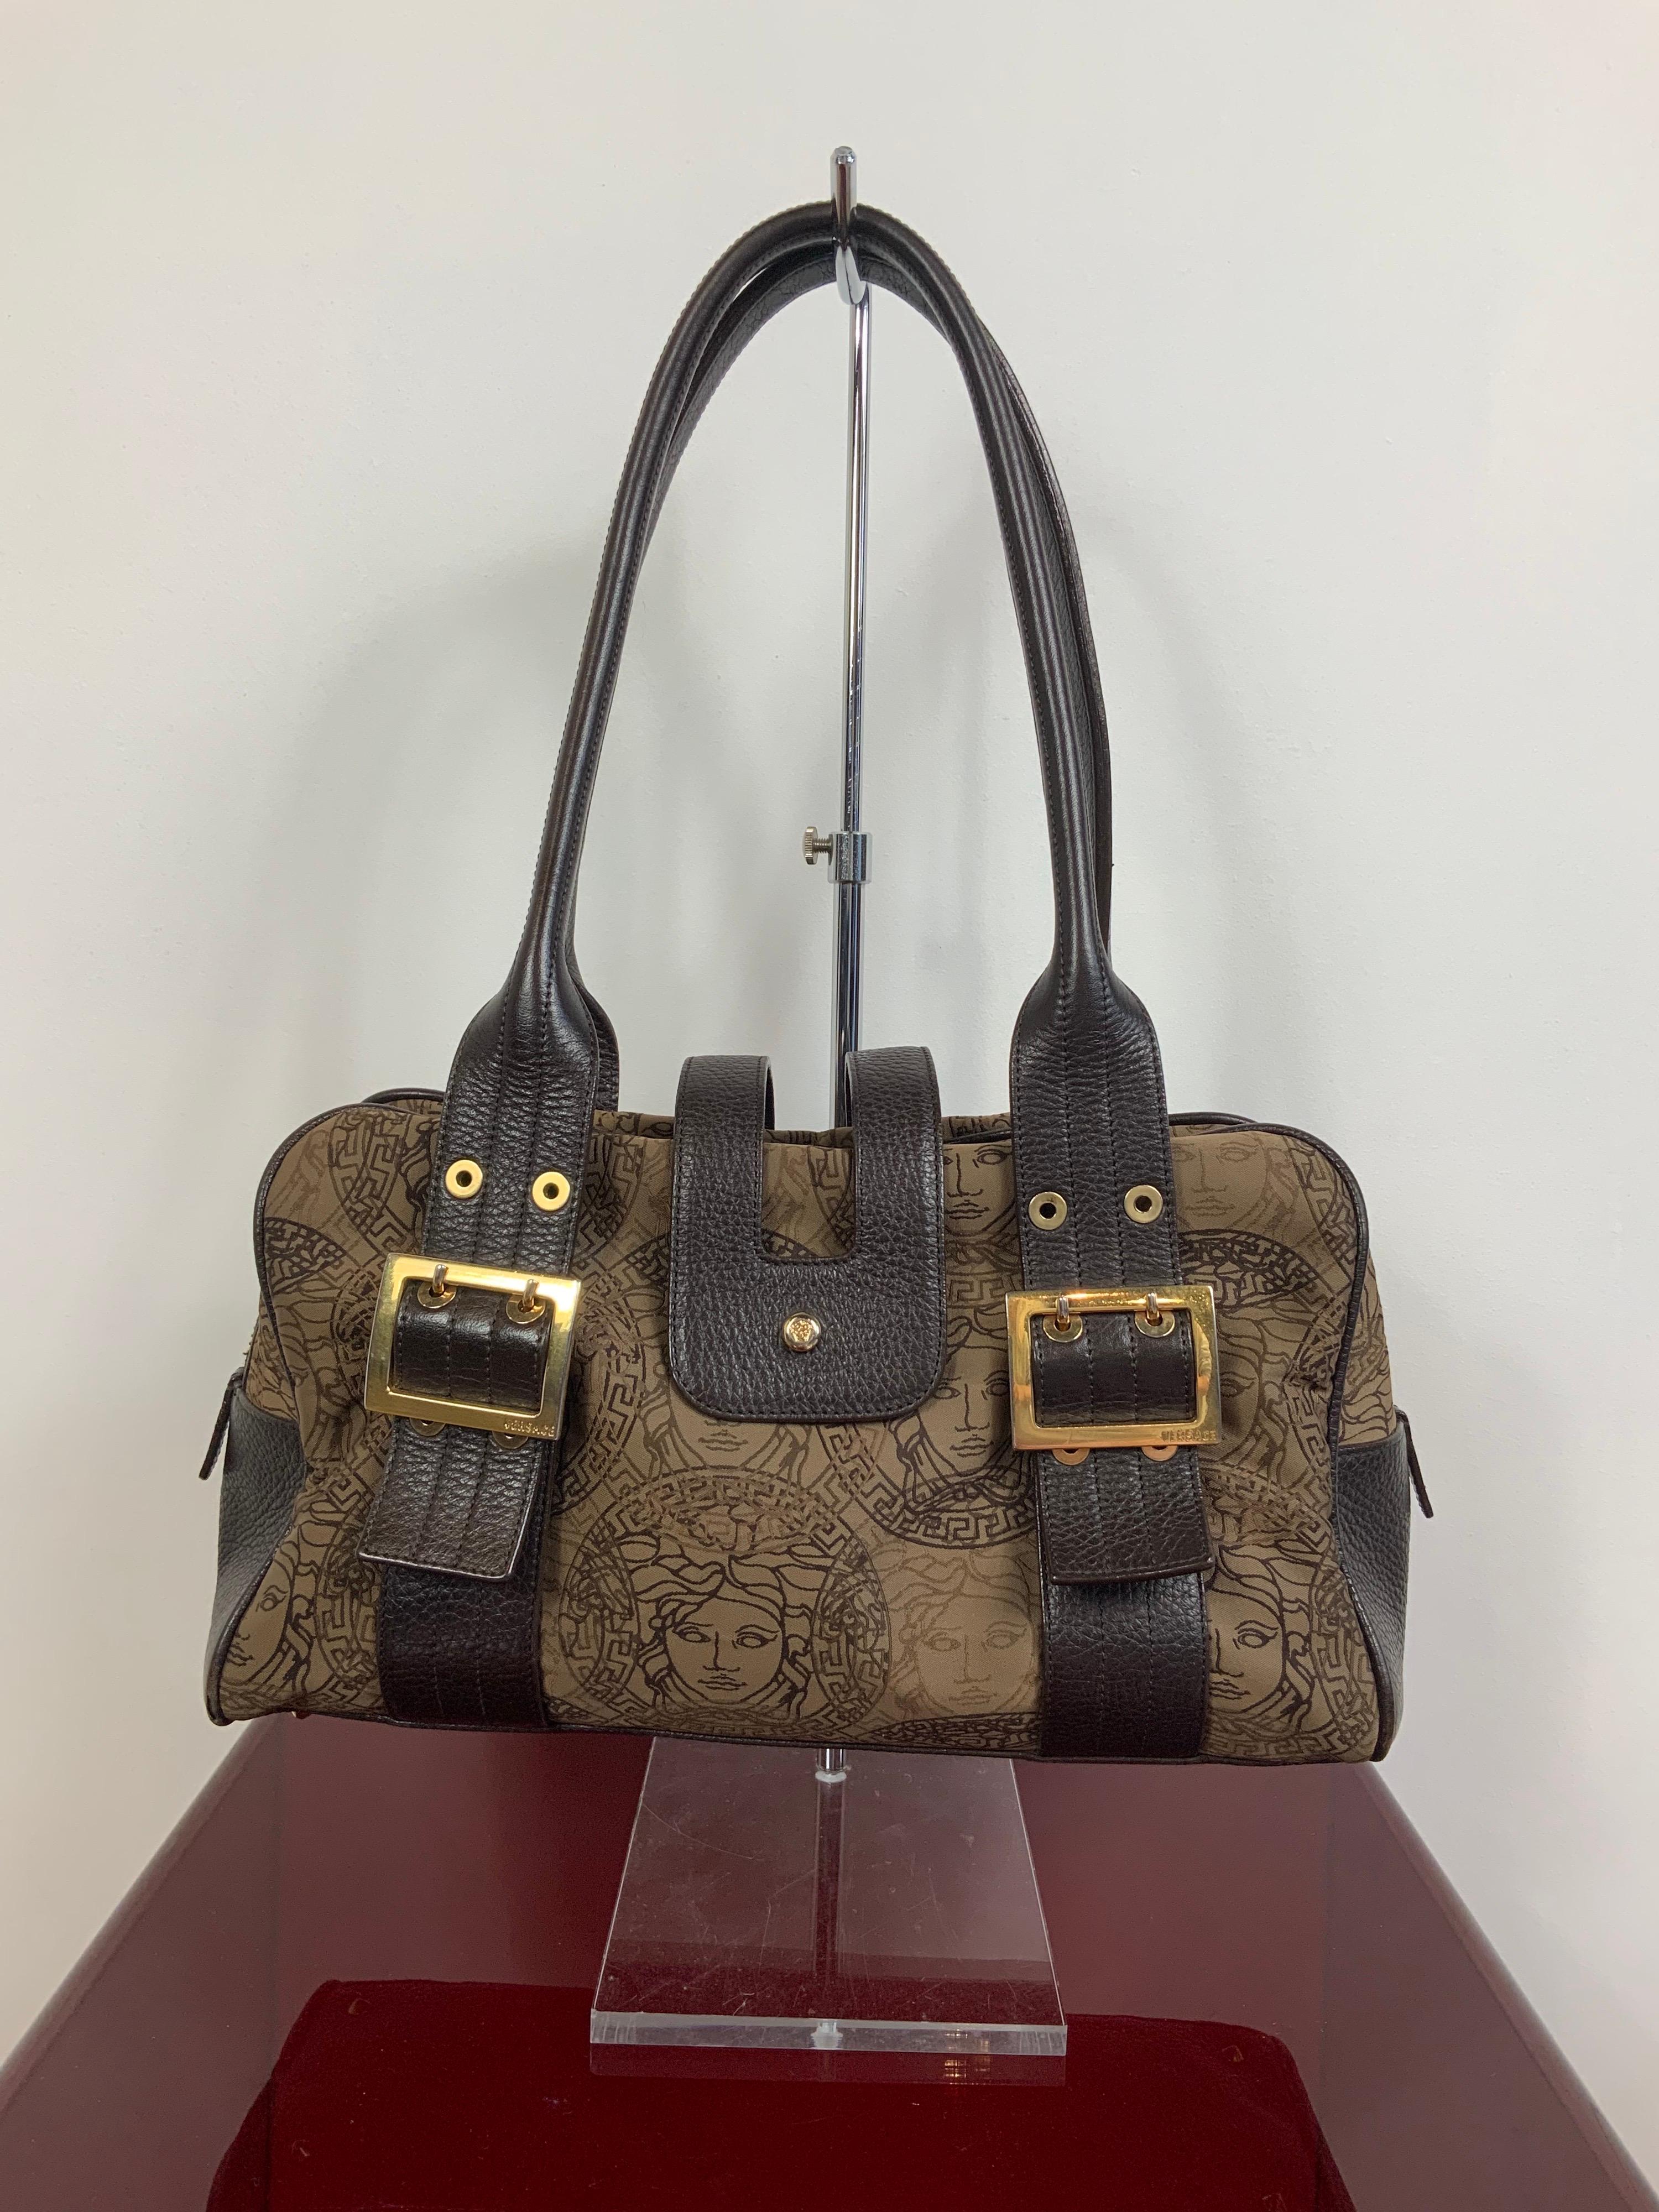 Gianni Versace medusa bag. About 90s.
Featuring medusa pattern fabrics, leather handle and details and gold hardware (the gold color is a little bit ruined). Zip and clip closure.
Bag interior is lined by a brown fabric. 
Bag corners show some sign